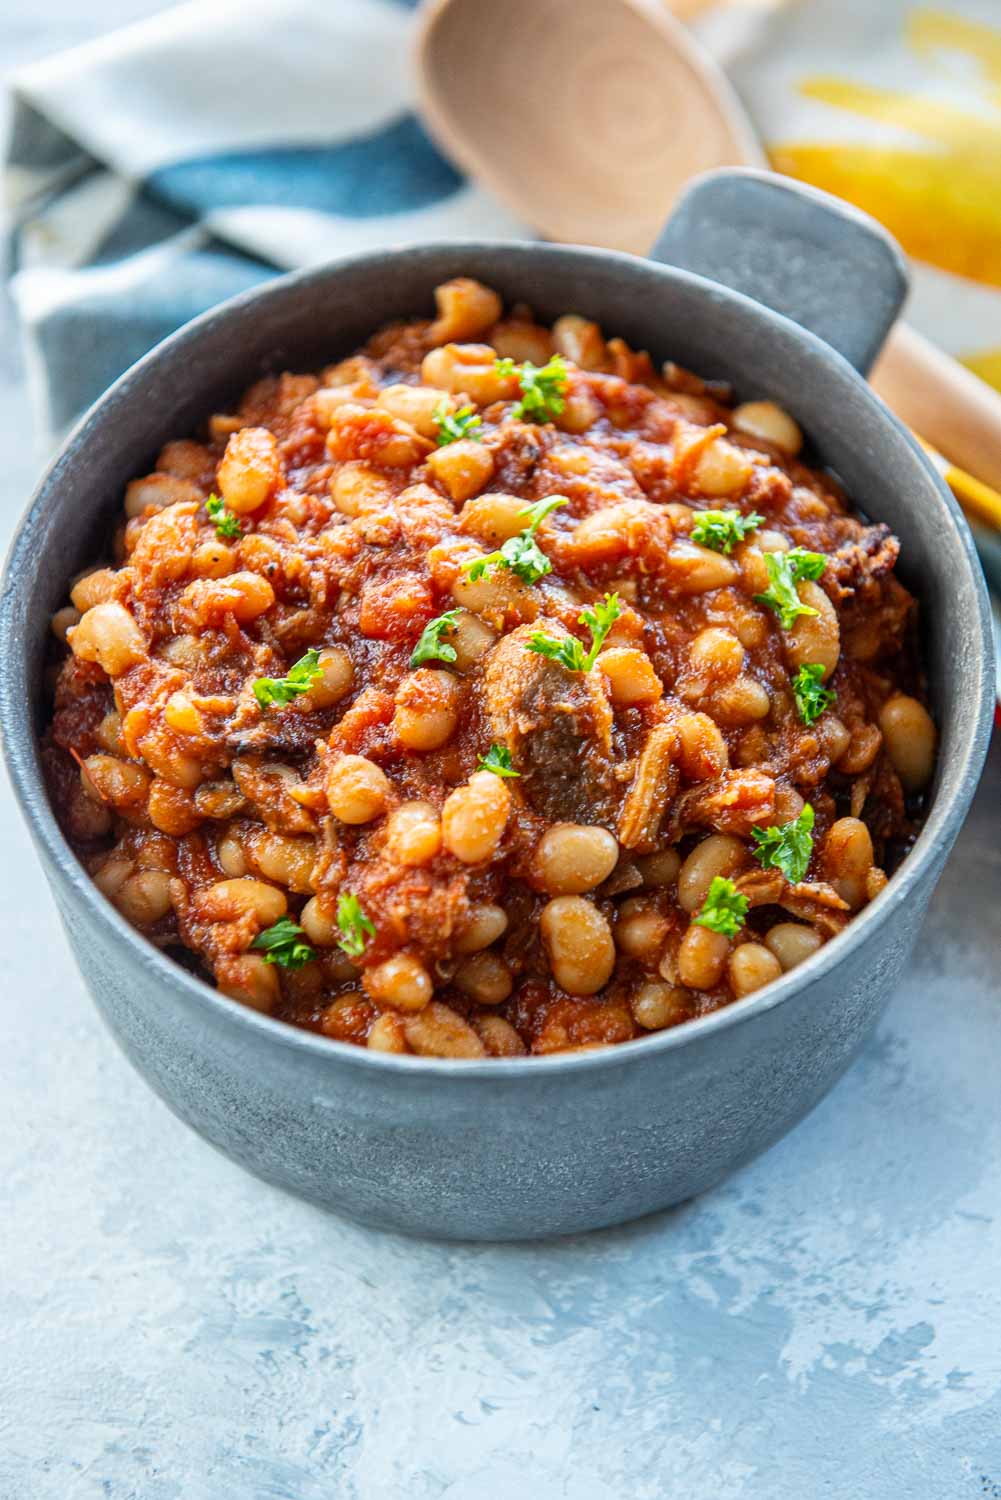 Slow Cooker Baked Beans